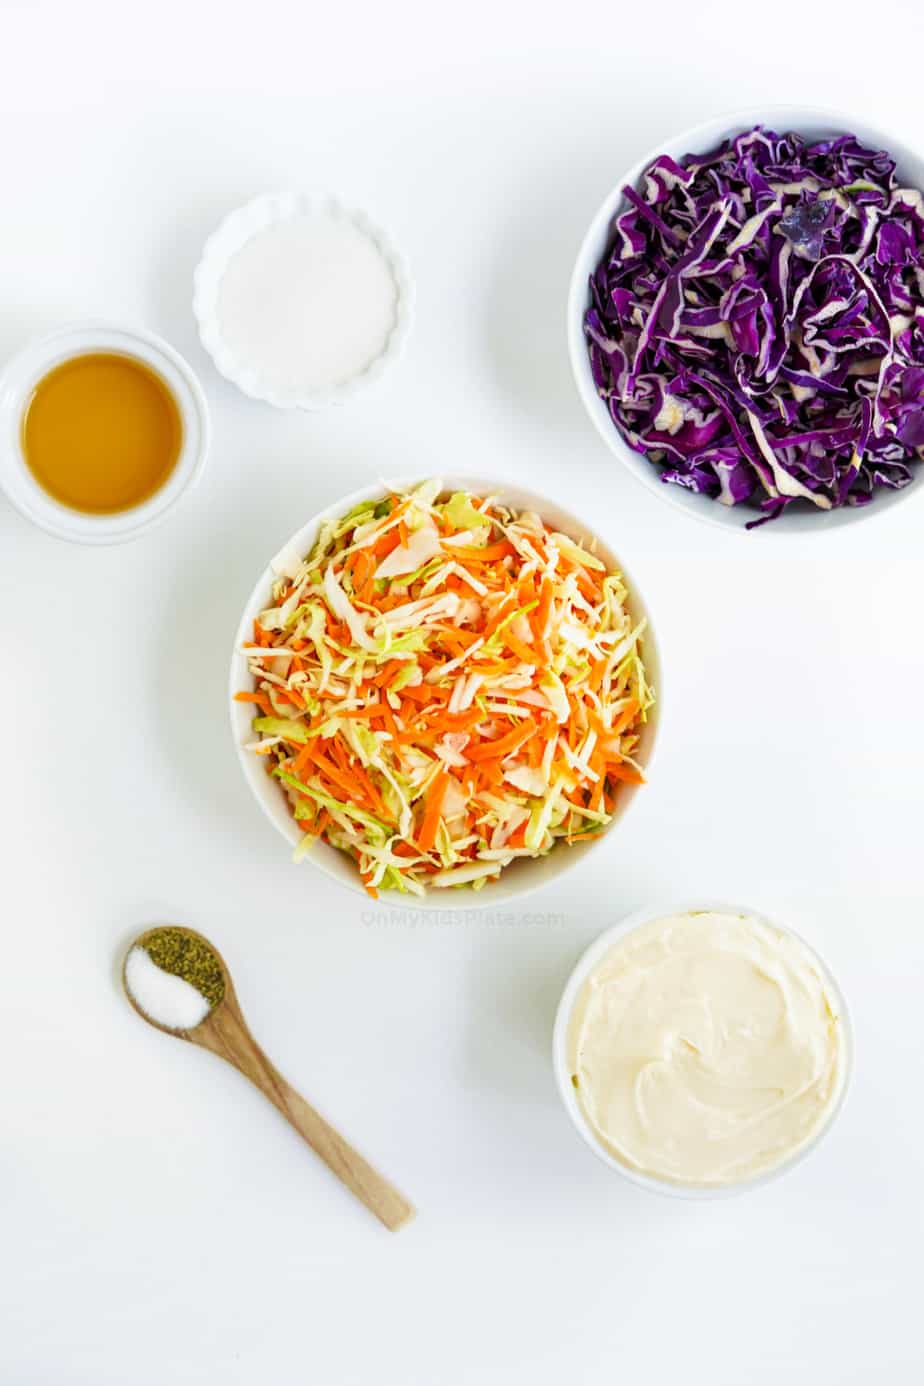 Ingredients for coleslaw from overhead in bowls